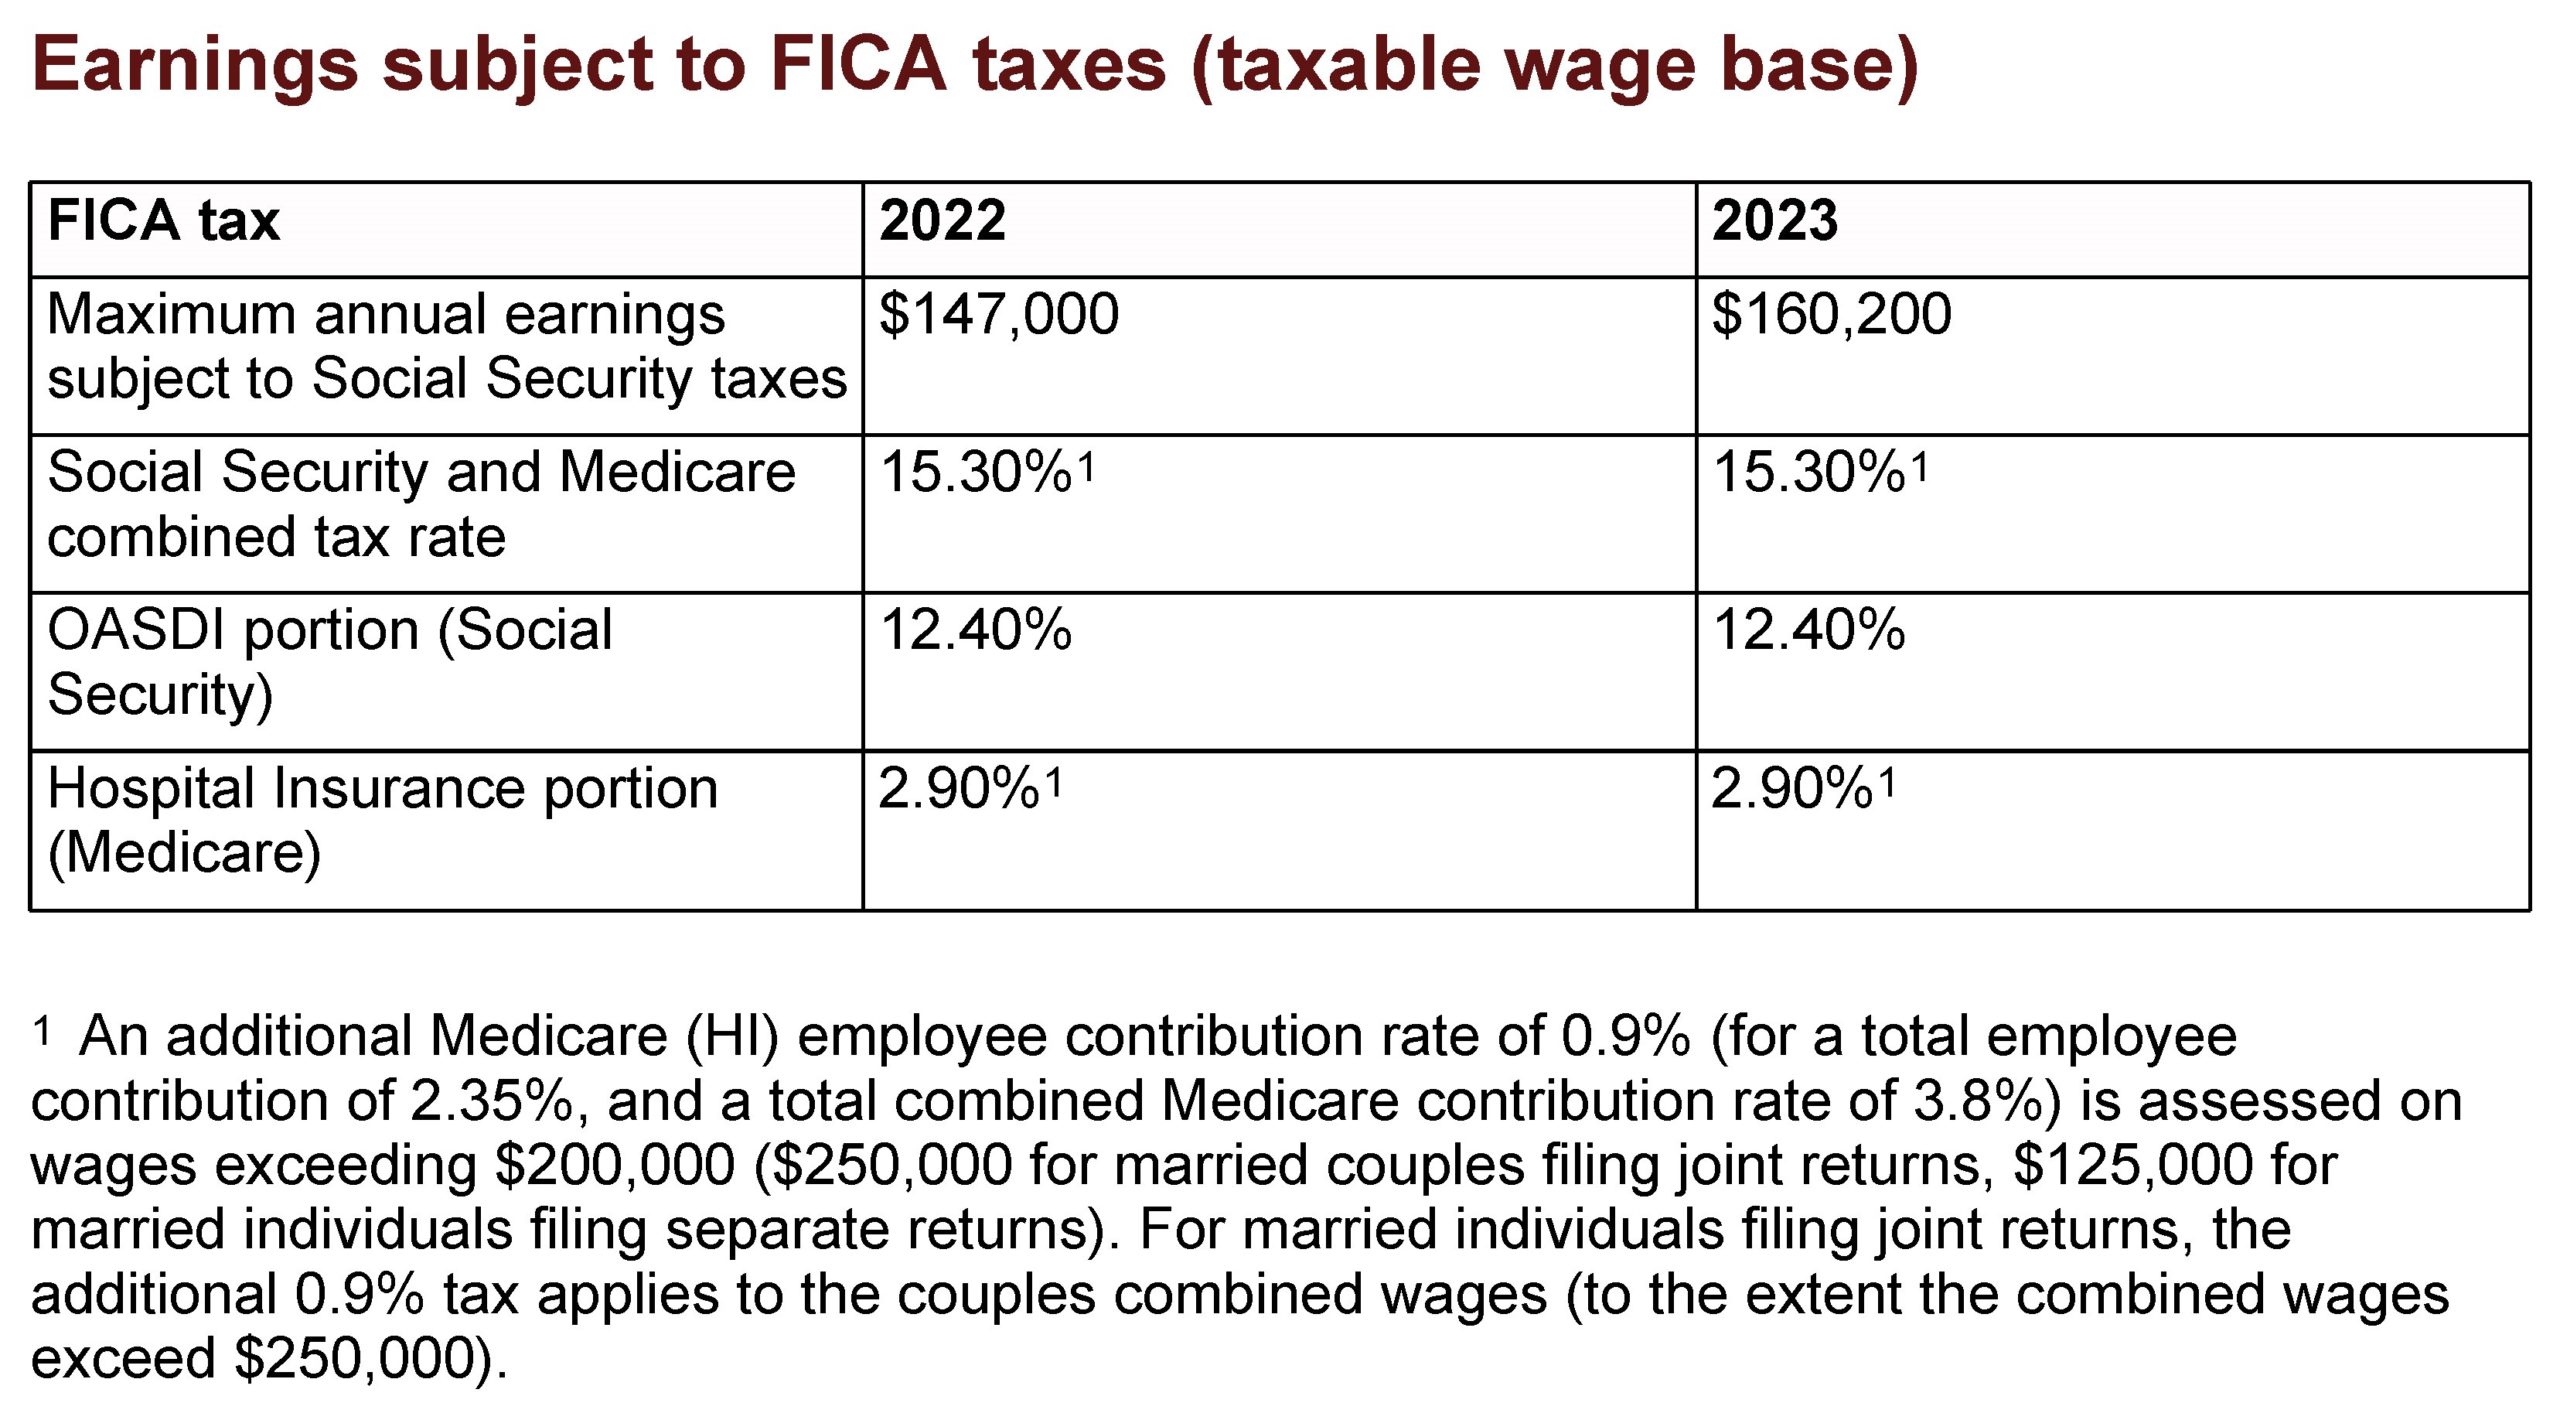 Earnings Subject to FICA Taxes (Taxable Wage Base)